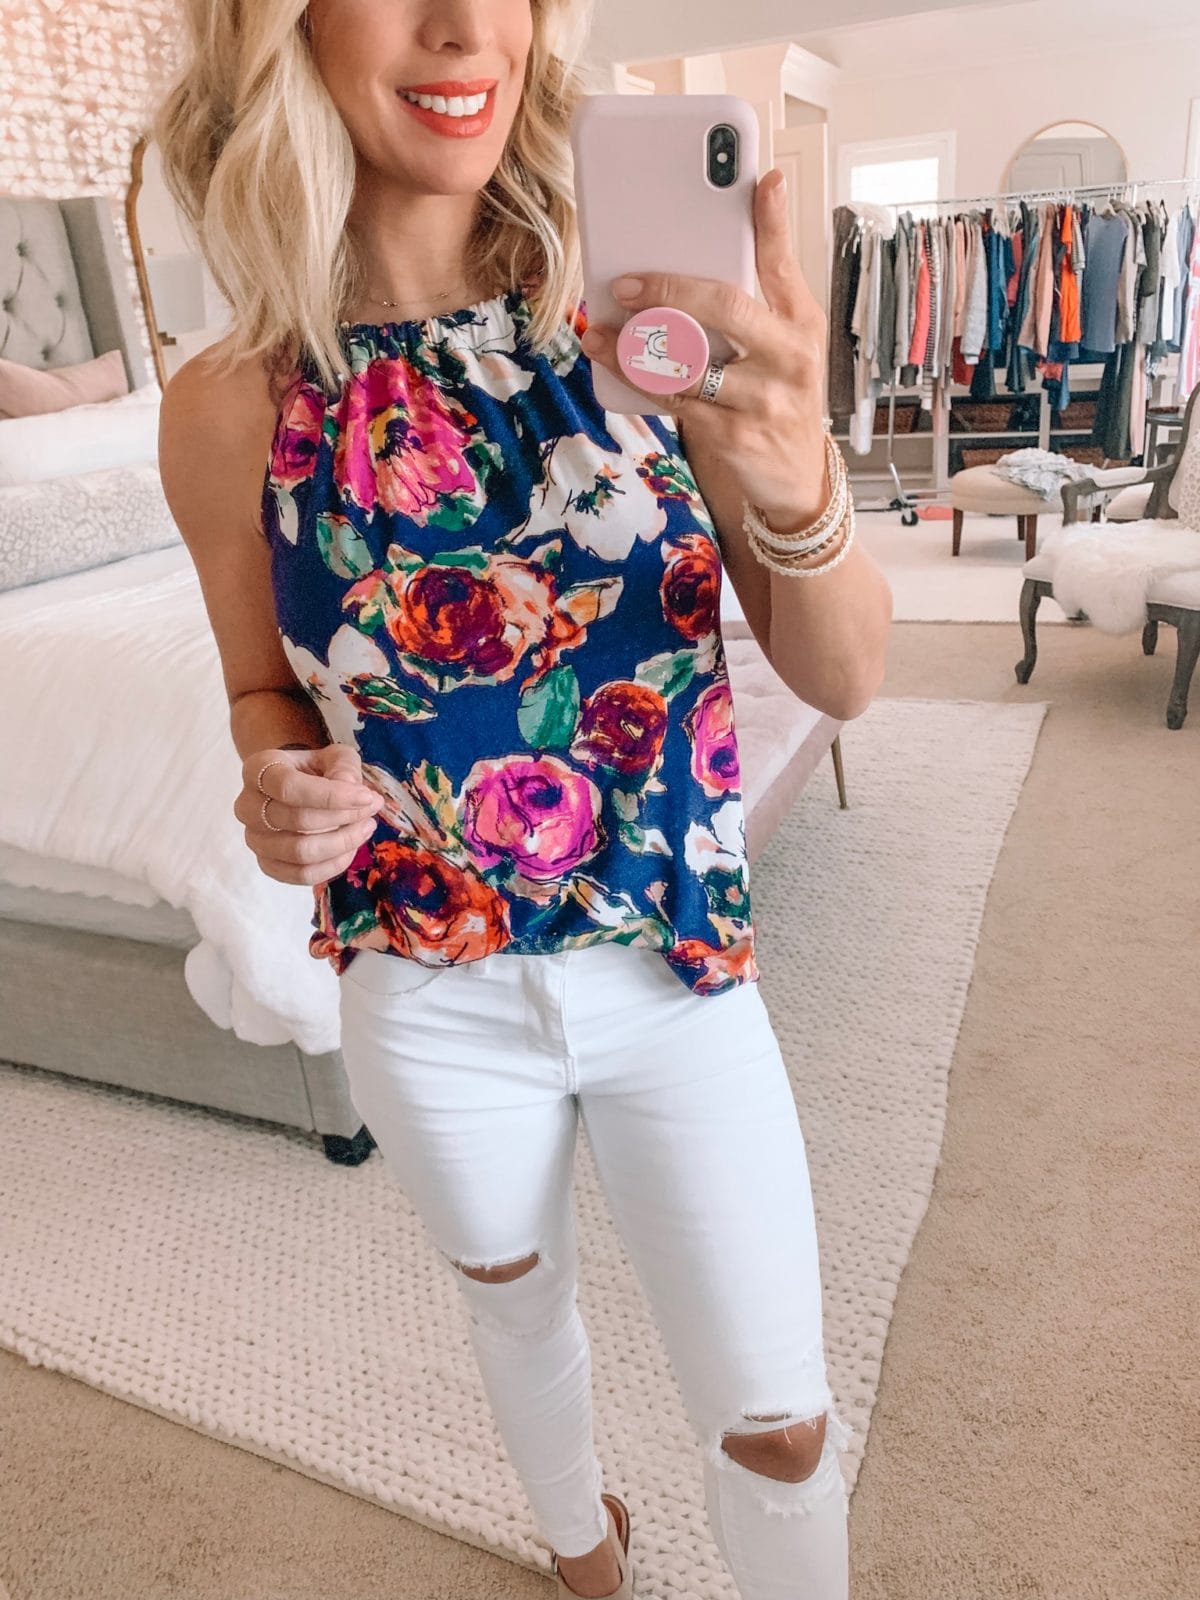 Dressing Room - Floral tank and white jeans